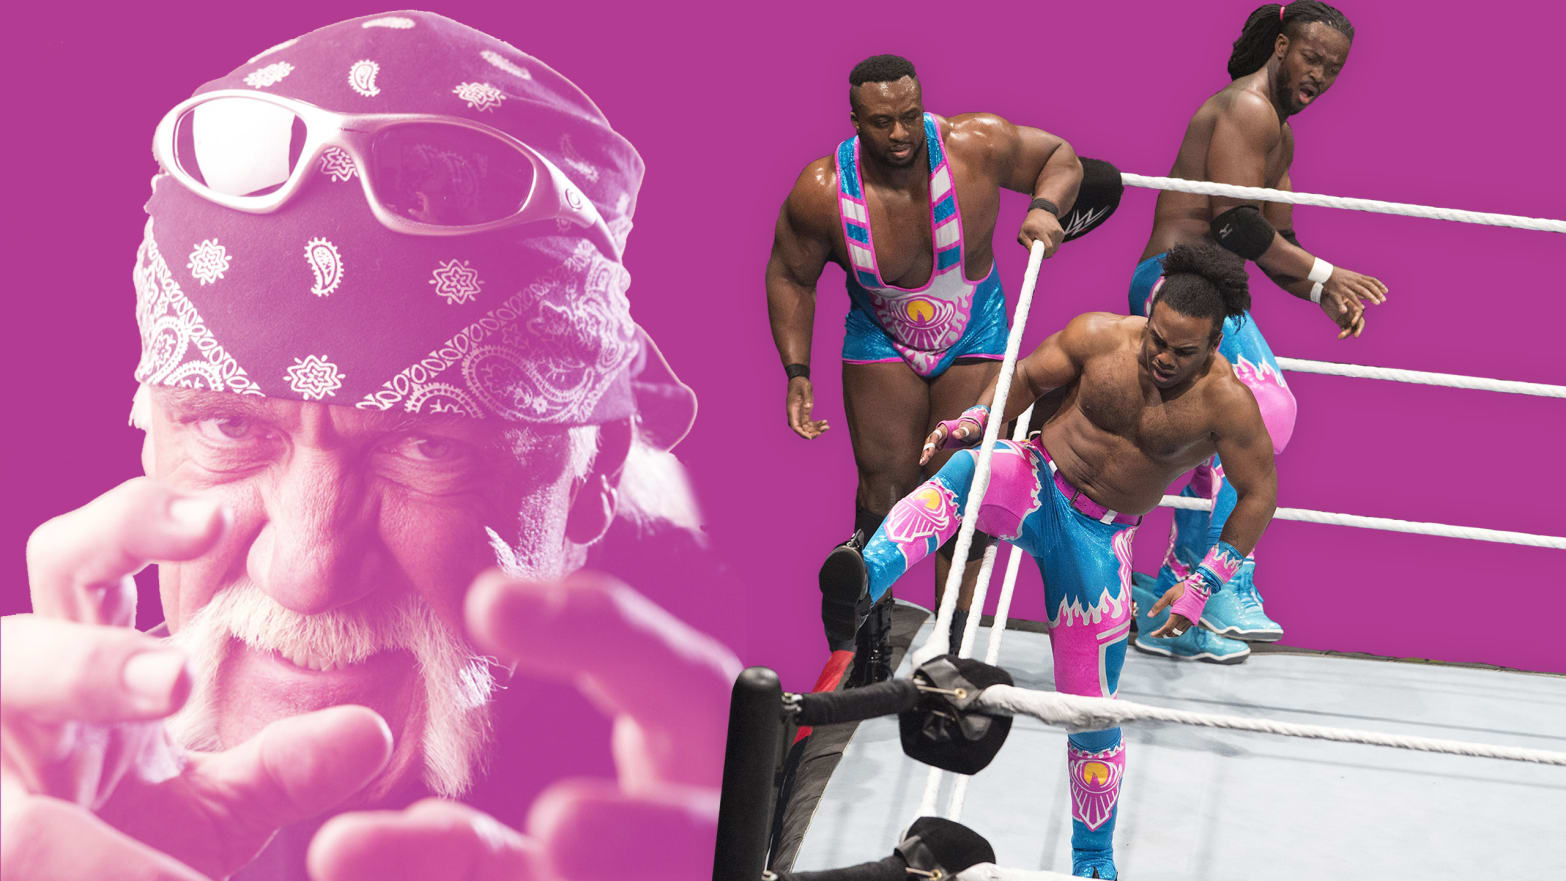 Racist Hulk Hogans WWE Comeback Irks Black Wrestlers We Find It Difficult to Simply Forget